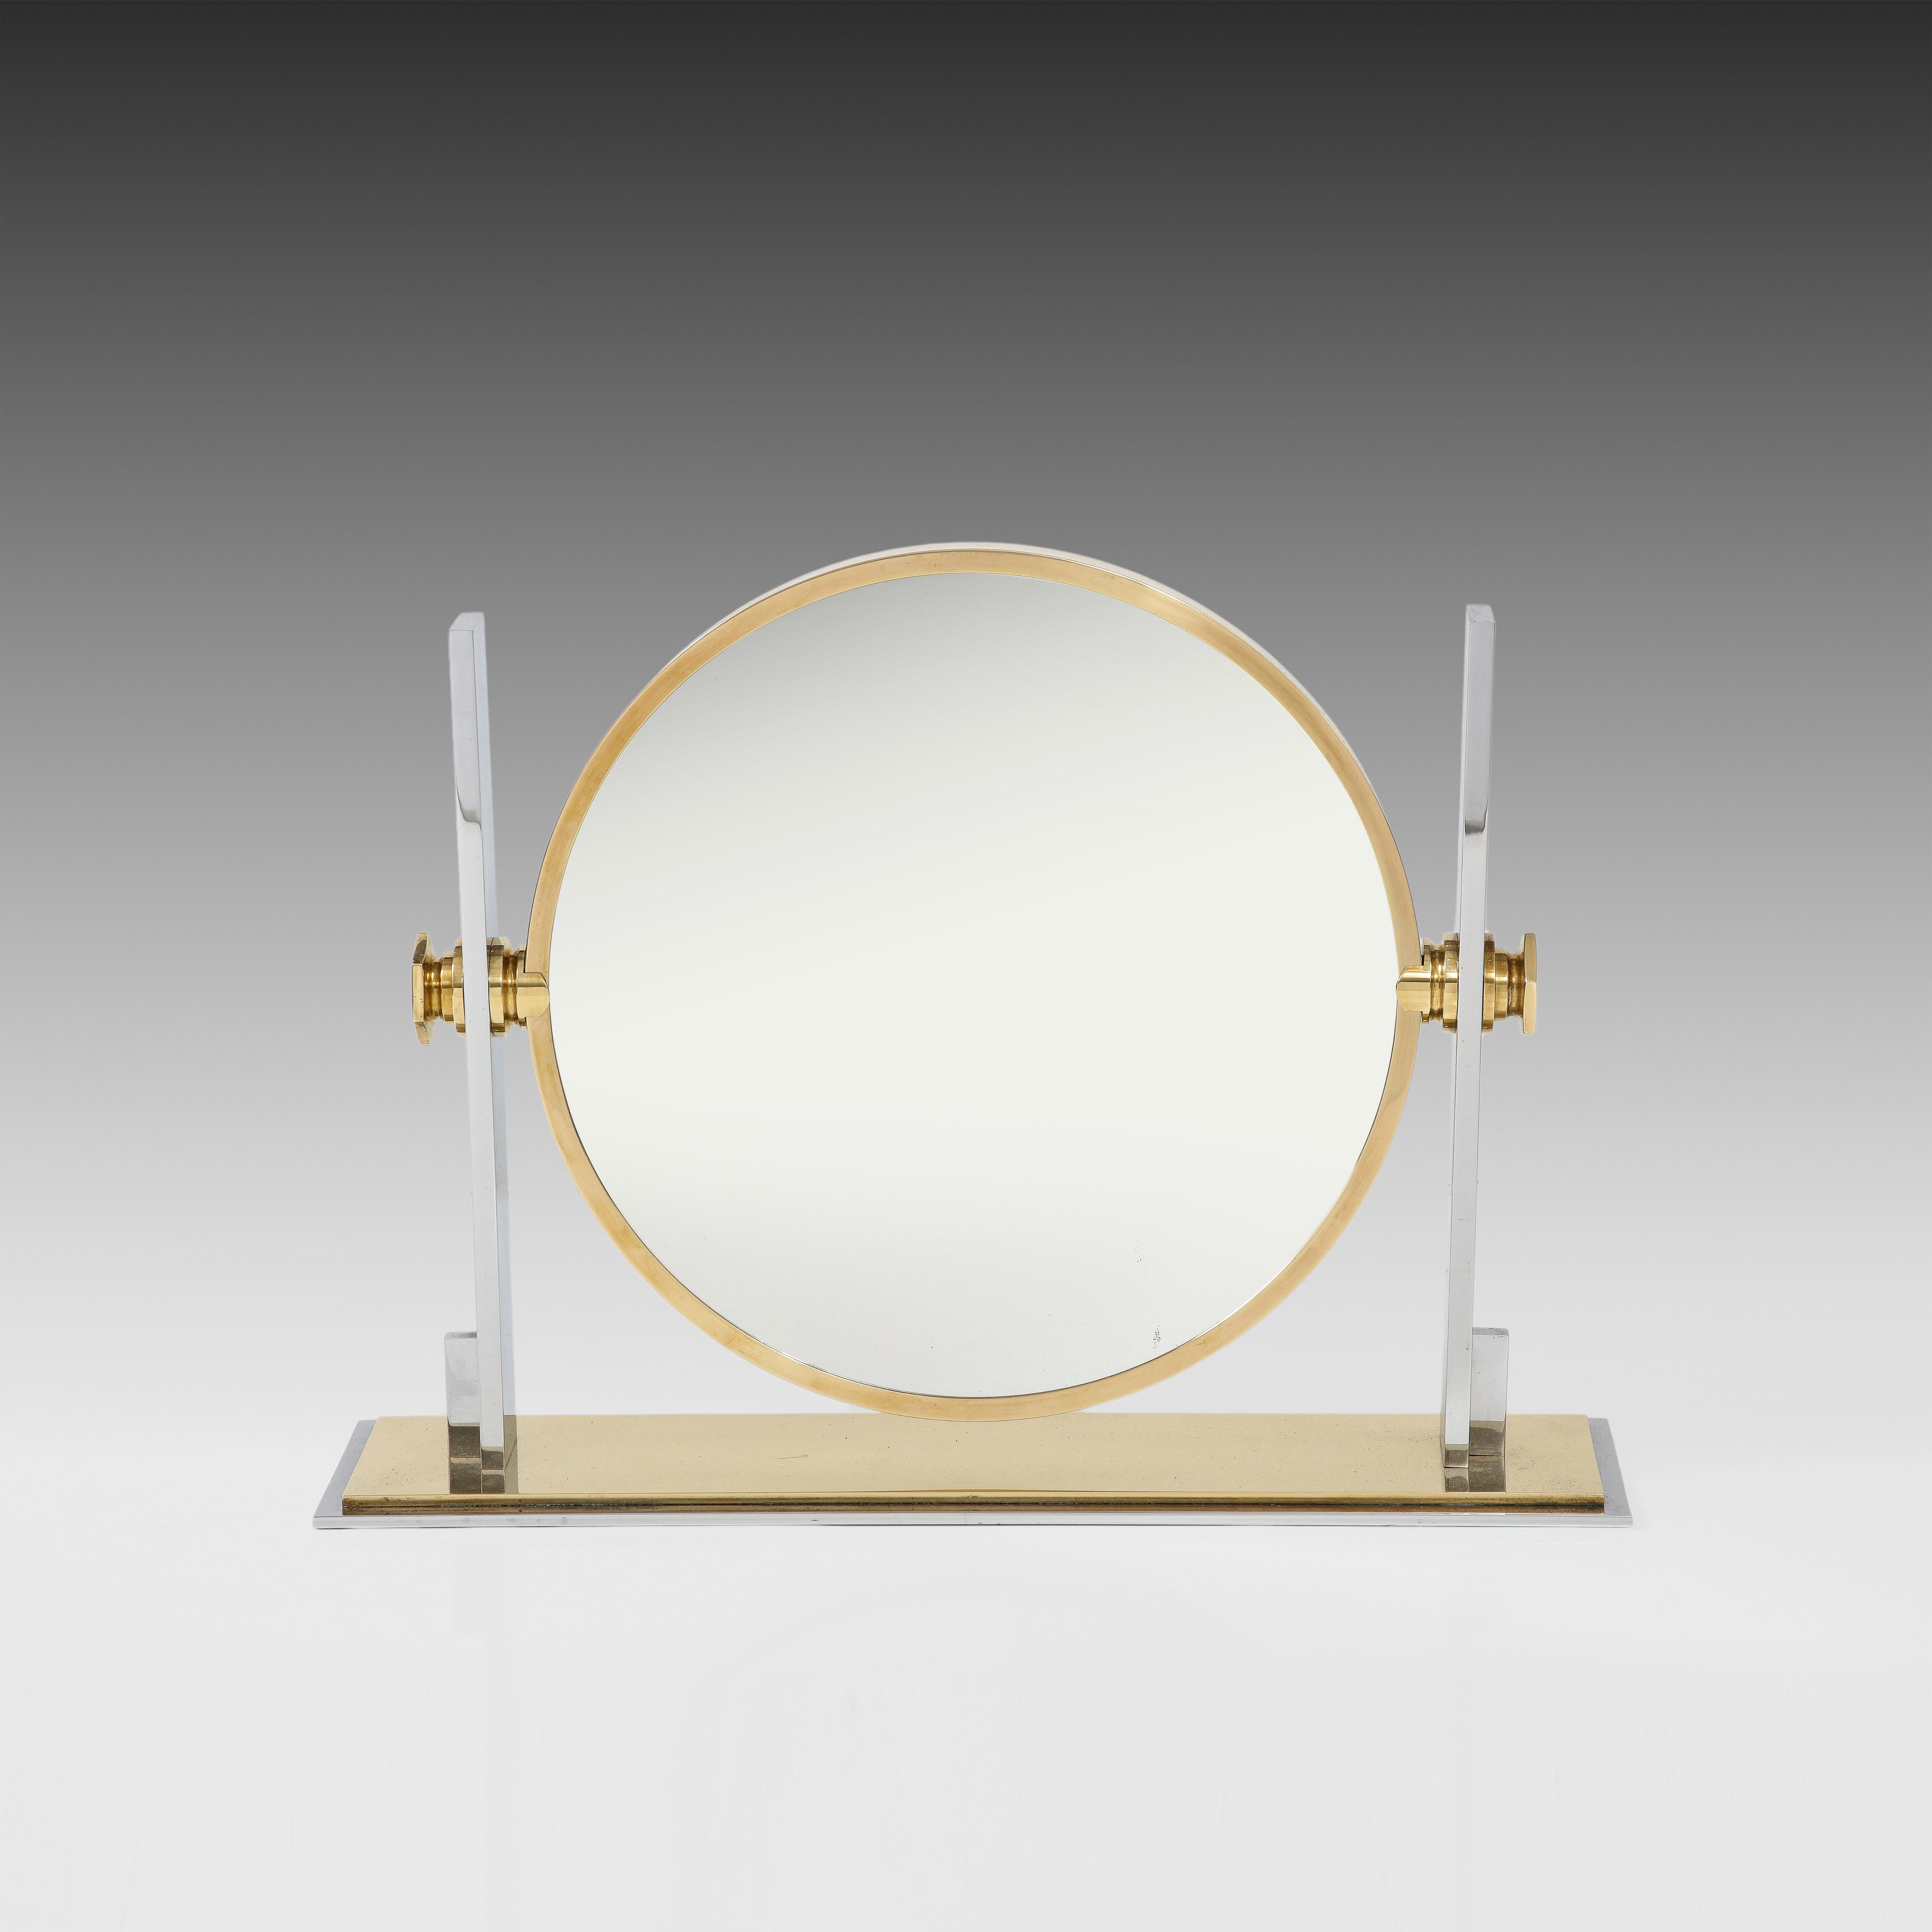 Hand-Crafted Karl Springer Large Vanity Mirror in Brass and Chrome, USA, 1980s For Sale